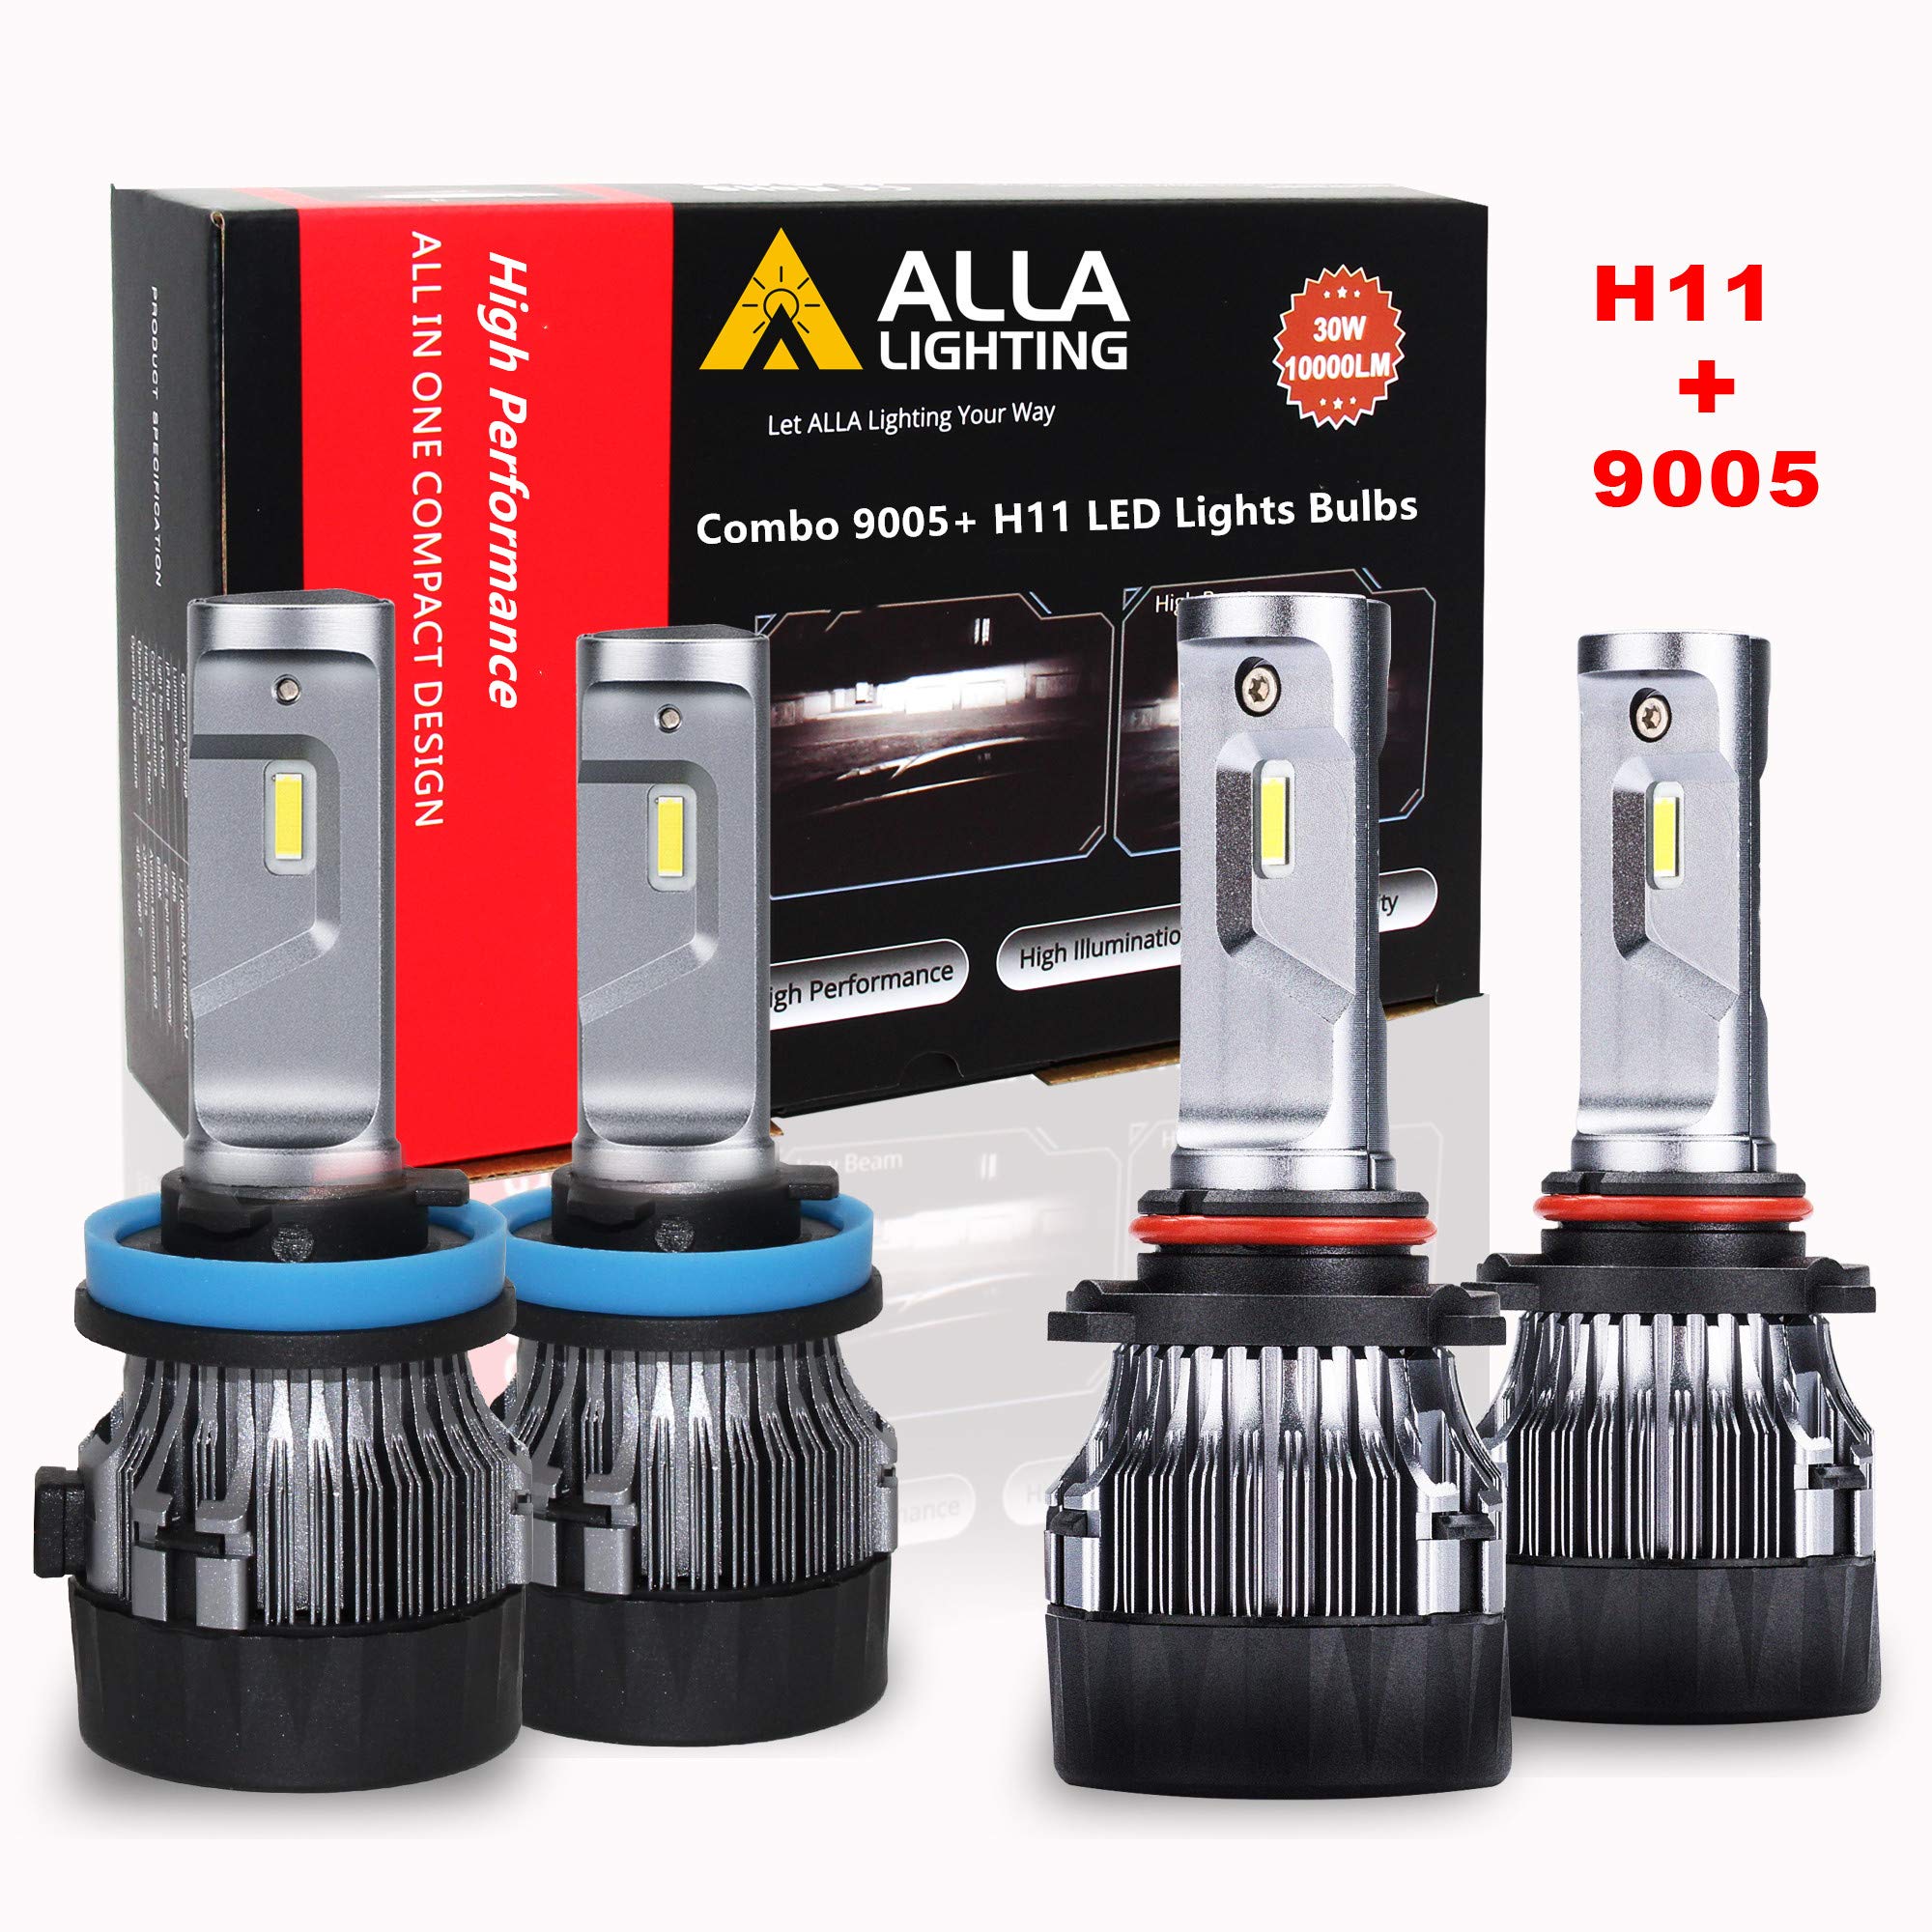 ALLA Lighting S-HCR H11 Low Beam HB3/9005 High Beam LED Bulbs Combo Kits Extreme Super Bright Replacement for Cars, Trucks, Xenon White (4 Packs, 2...